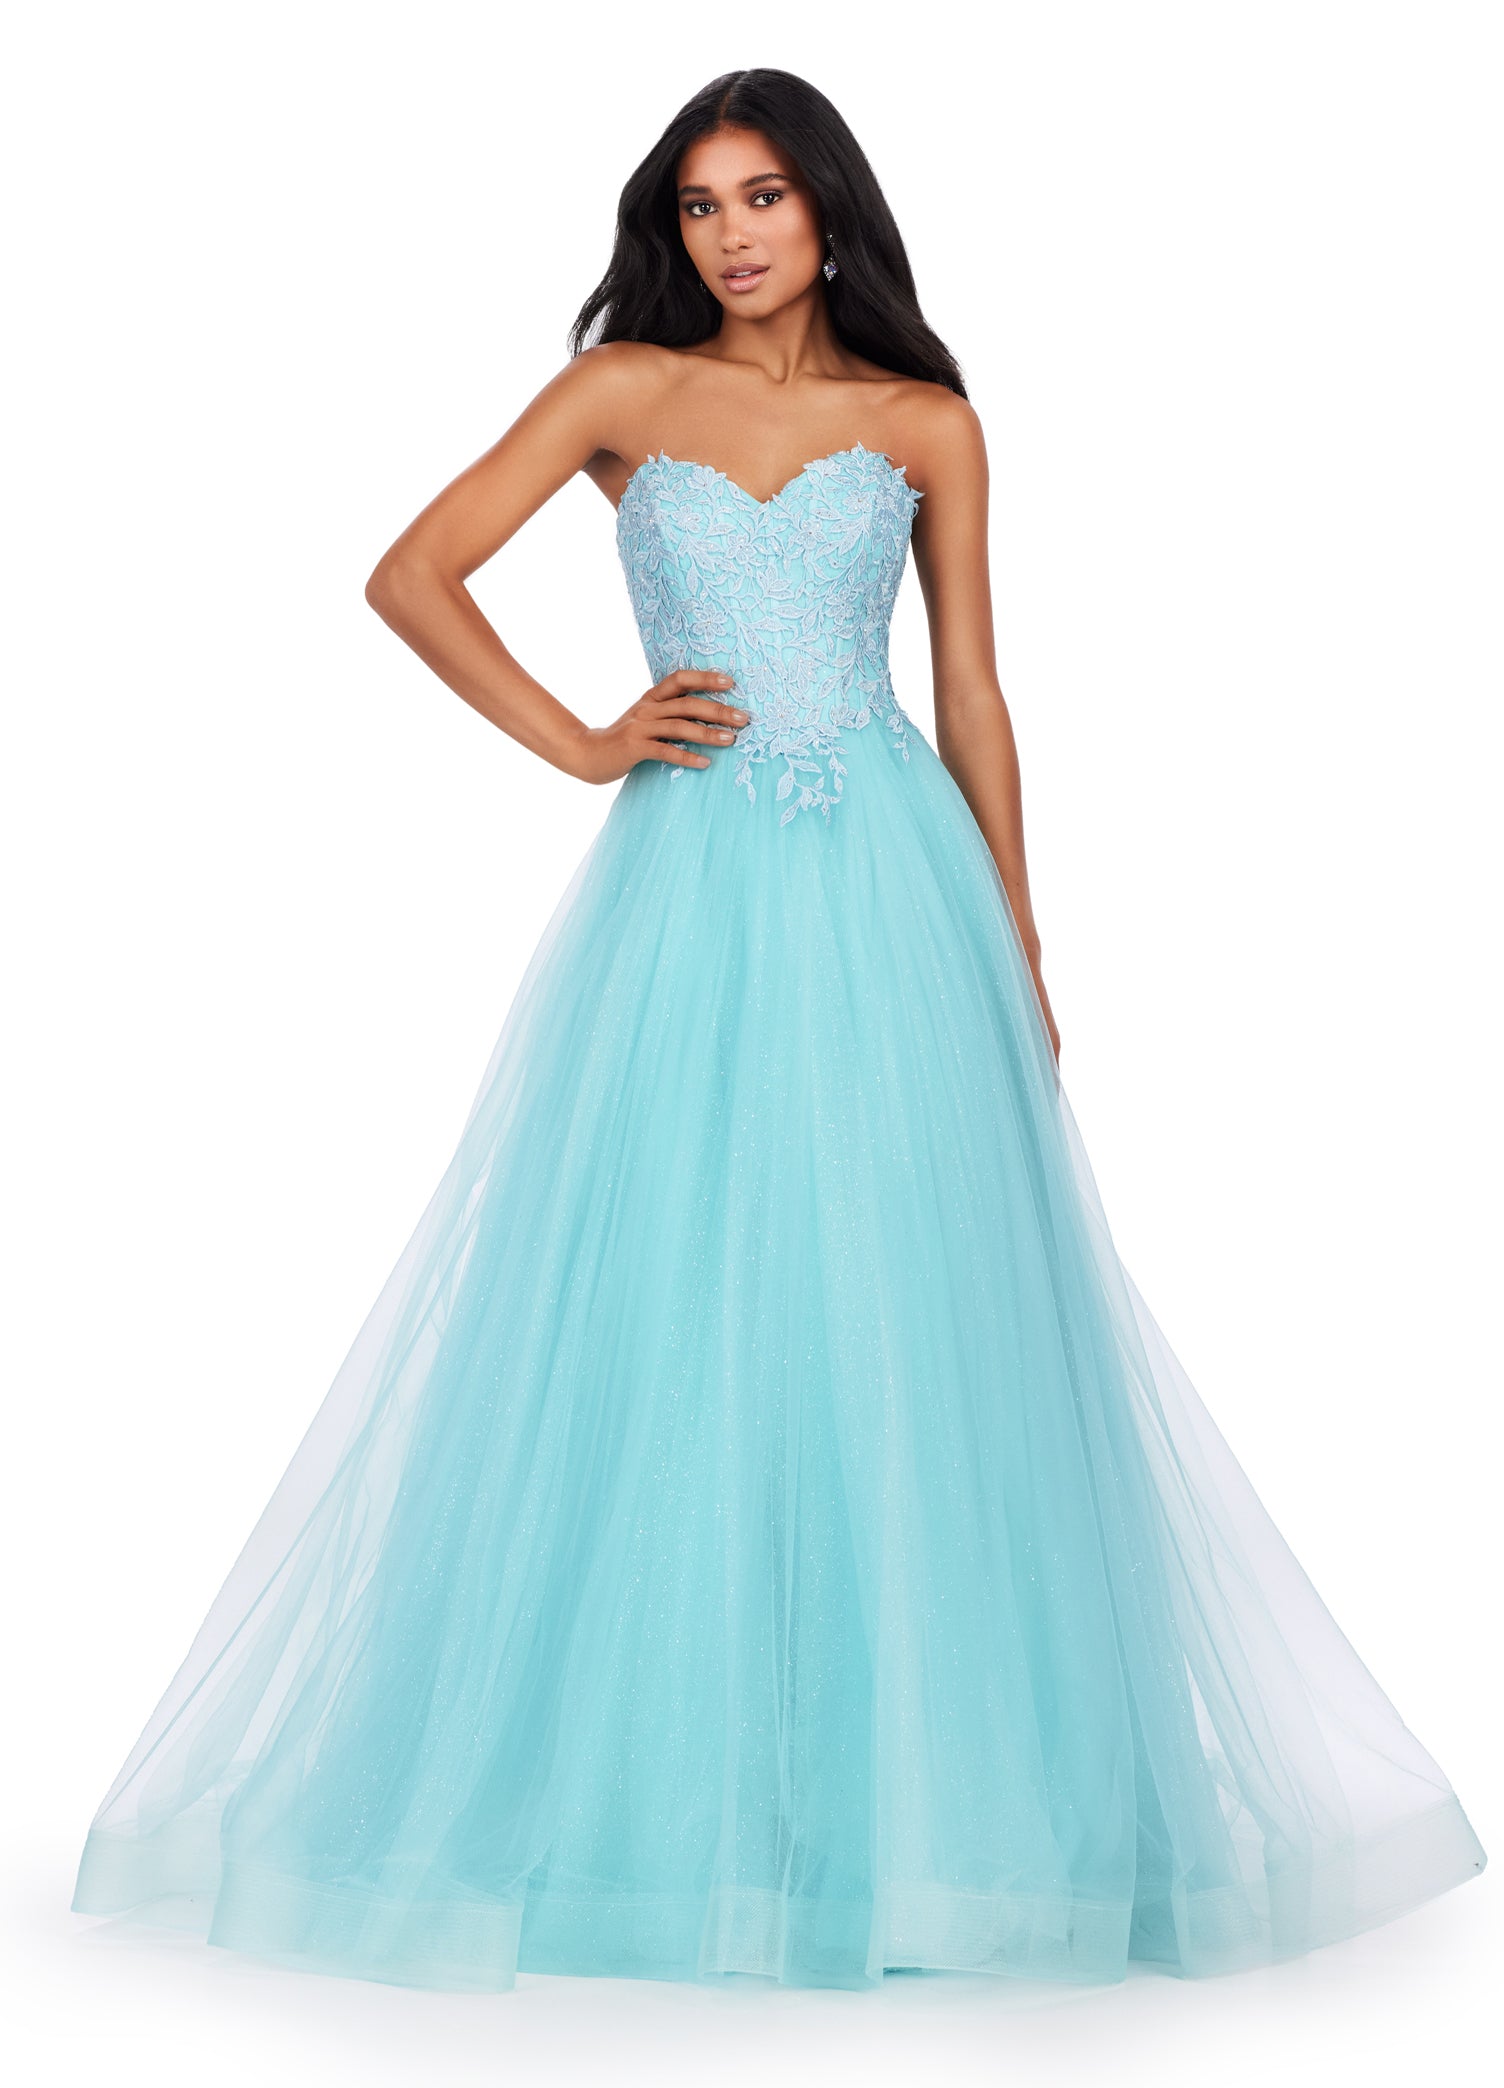 Ashley Lauren 11518 Glitter Tulle Ball Gown – Sparkly Gowns